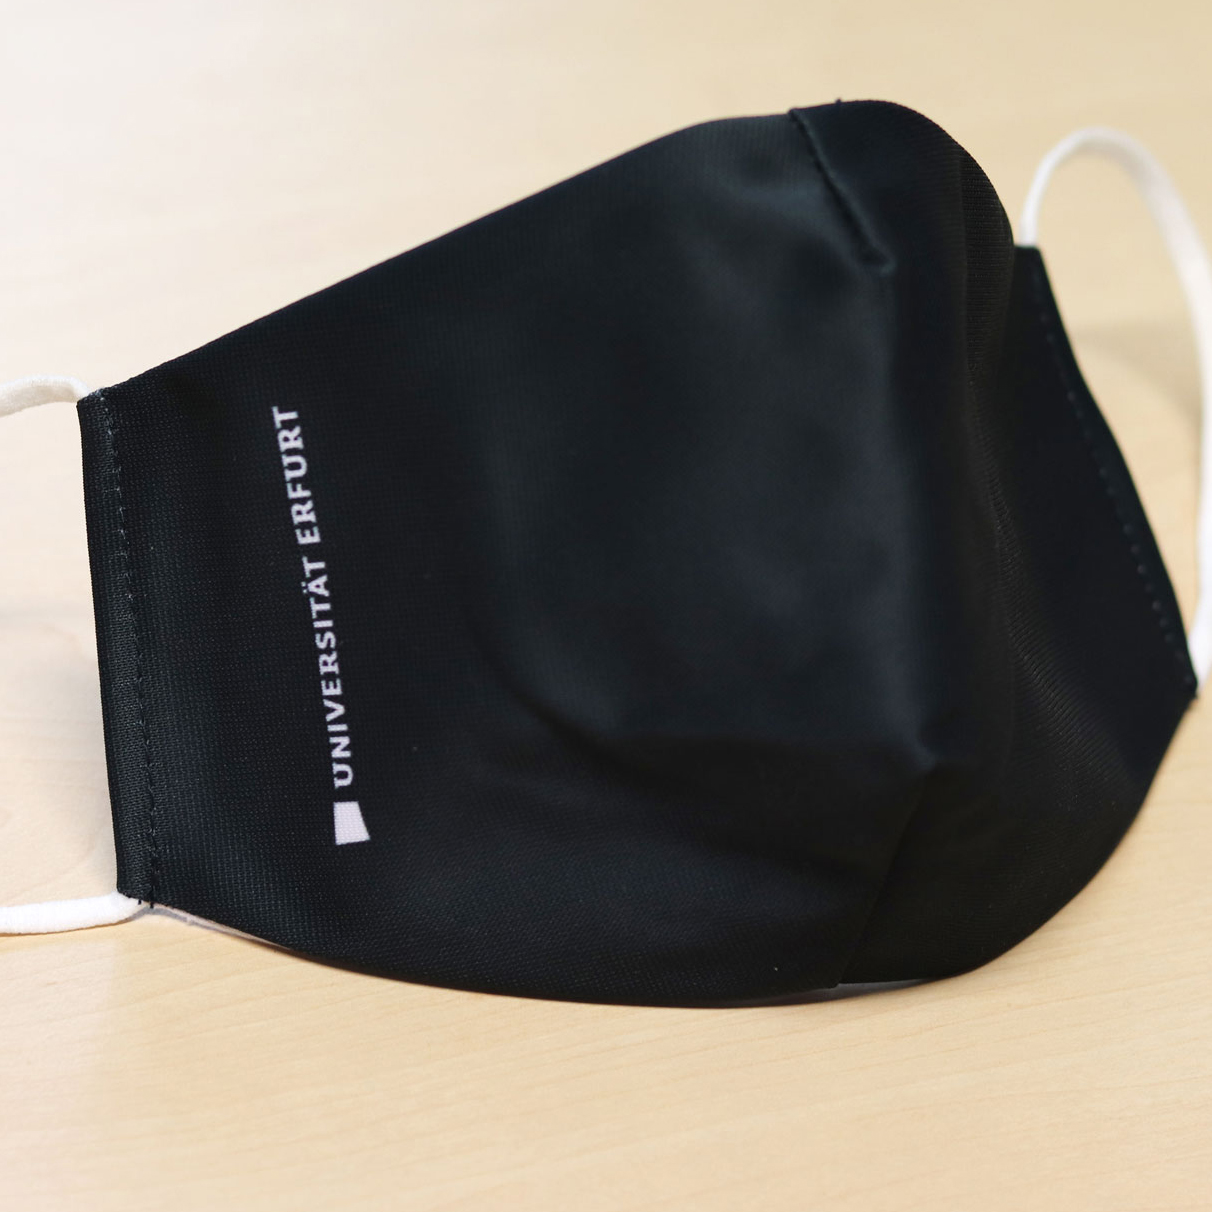 mouth-nose-cover (black)